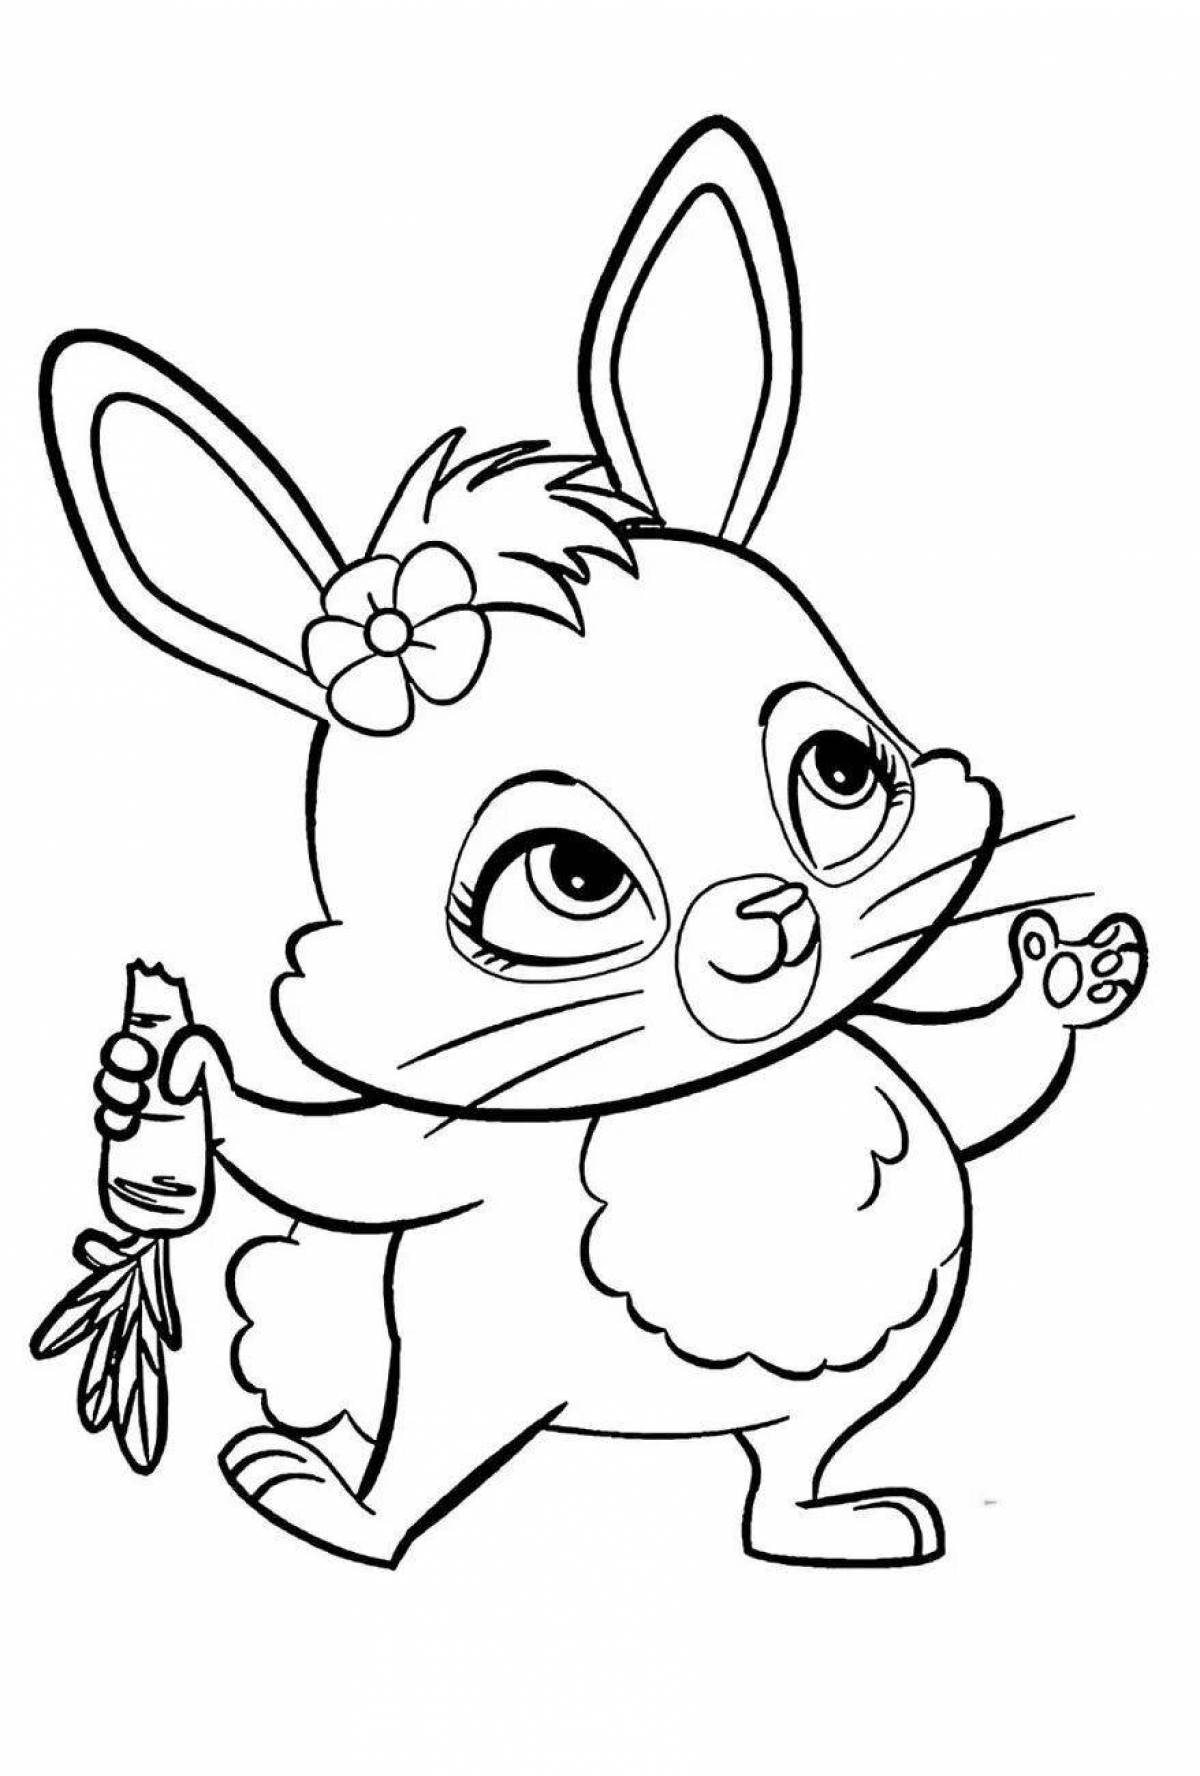 Anchanchimus playful coloring page